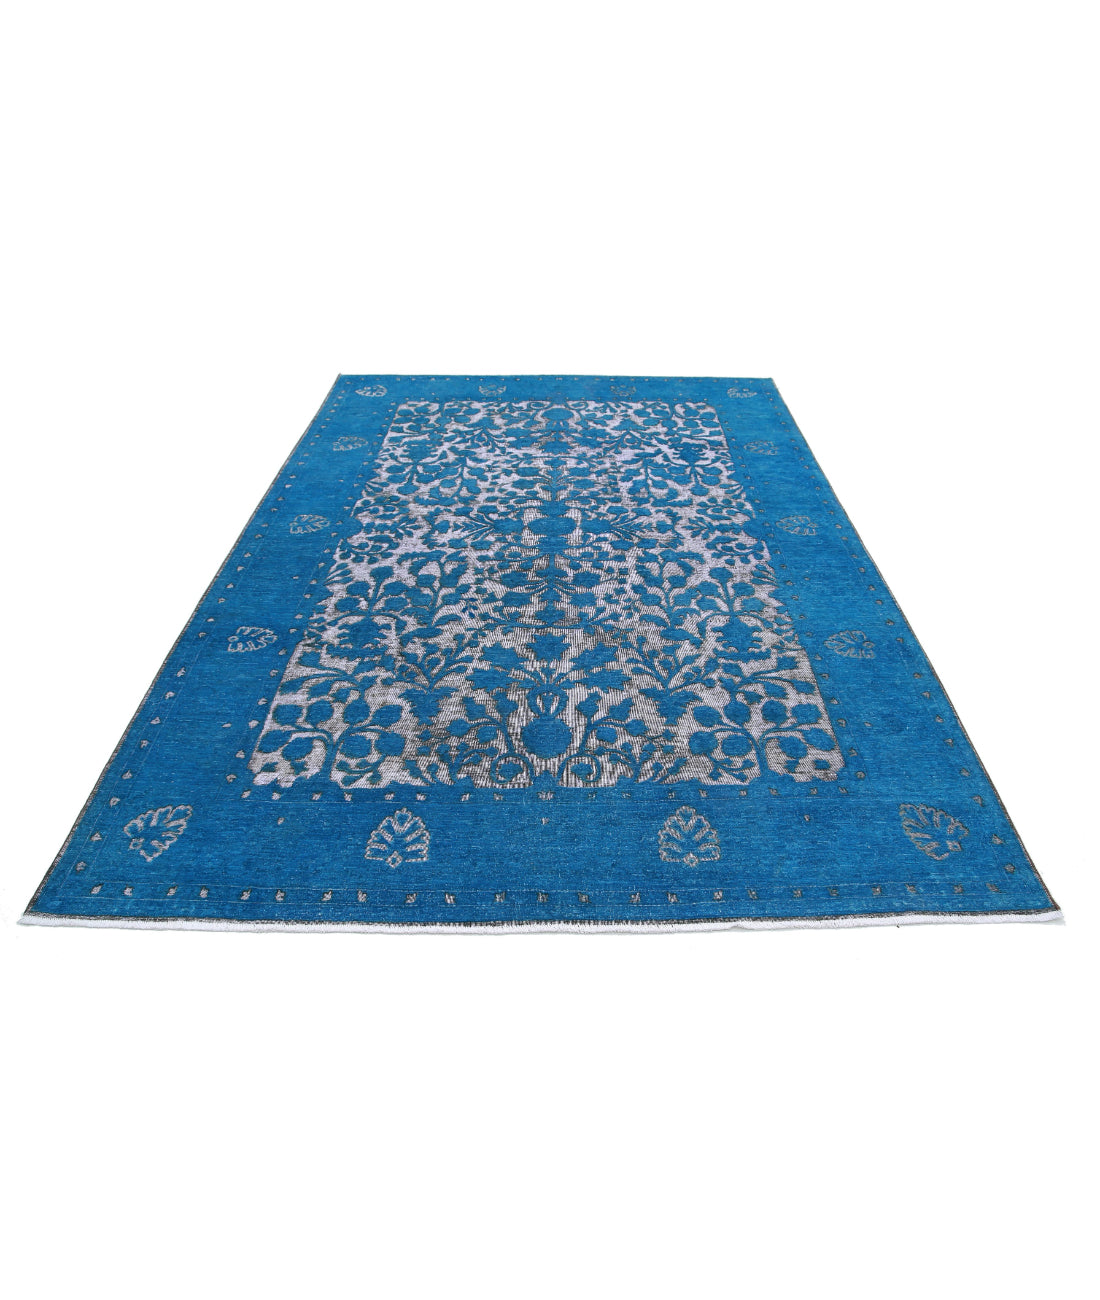 Hand Knotted Onyx Wool Rug - 6'10'' x 9'6'' 6'10'' x 9'6'' (205 X 285) / Teal / Teal